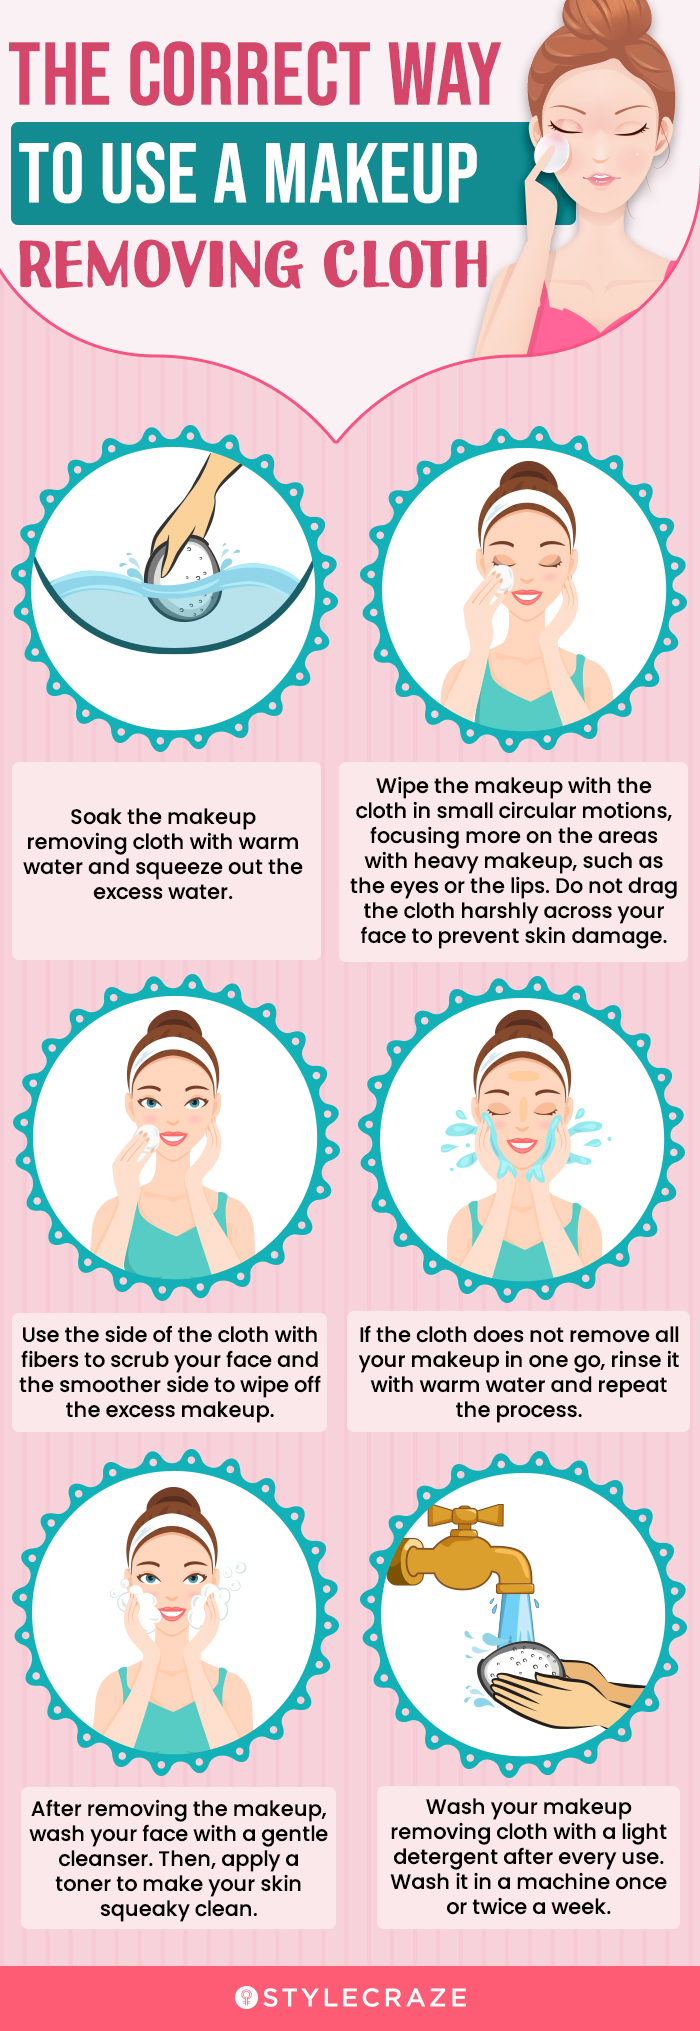 The Correct Way To Use A Makeup Removing Cloth (infographic)